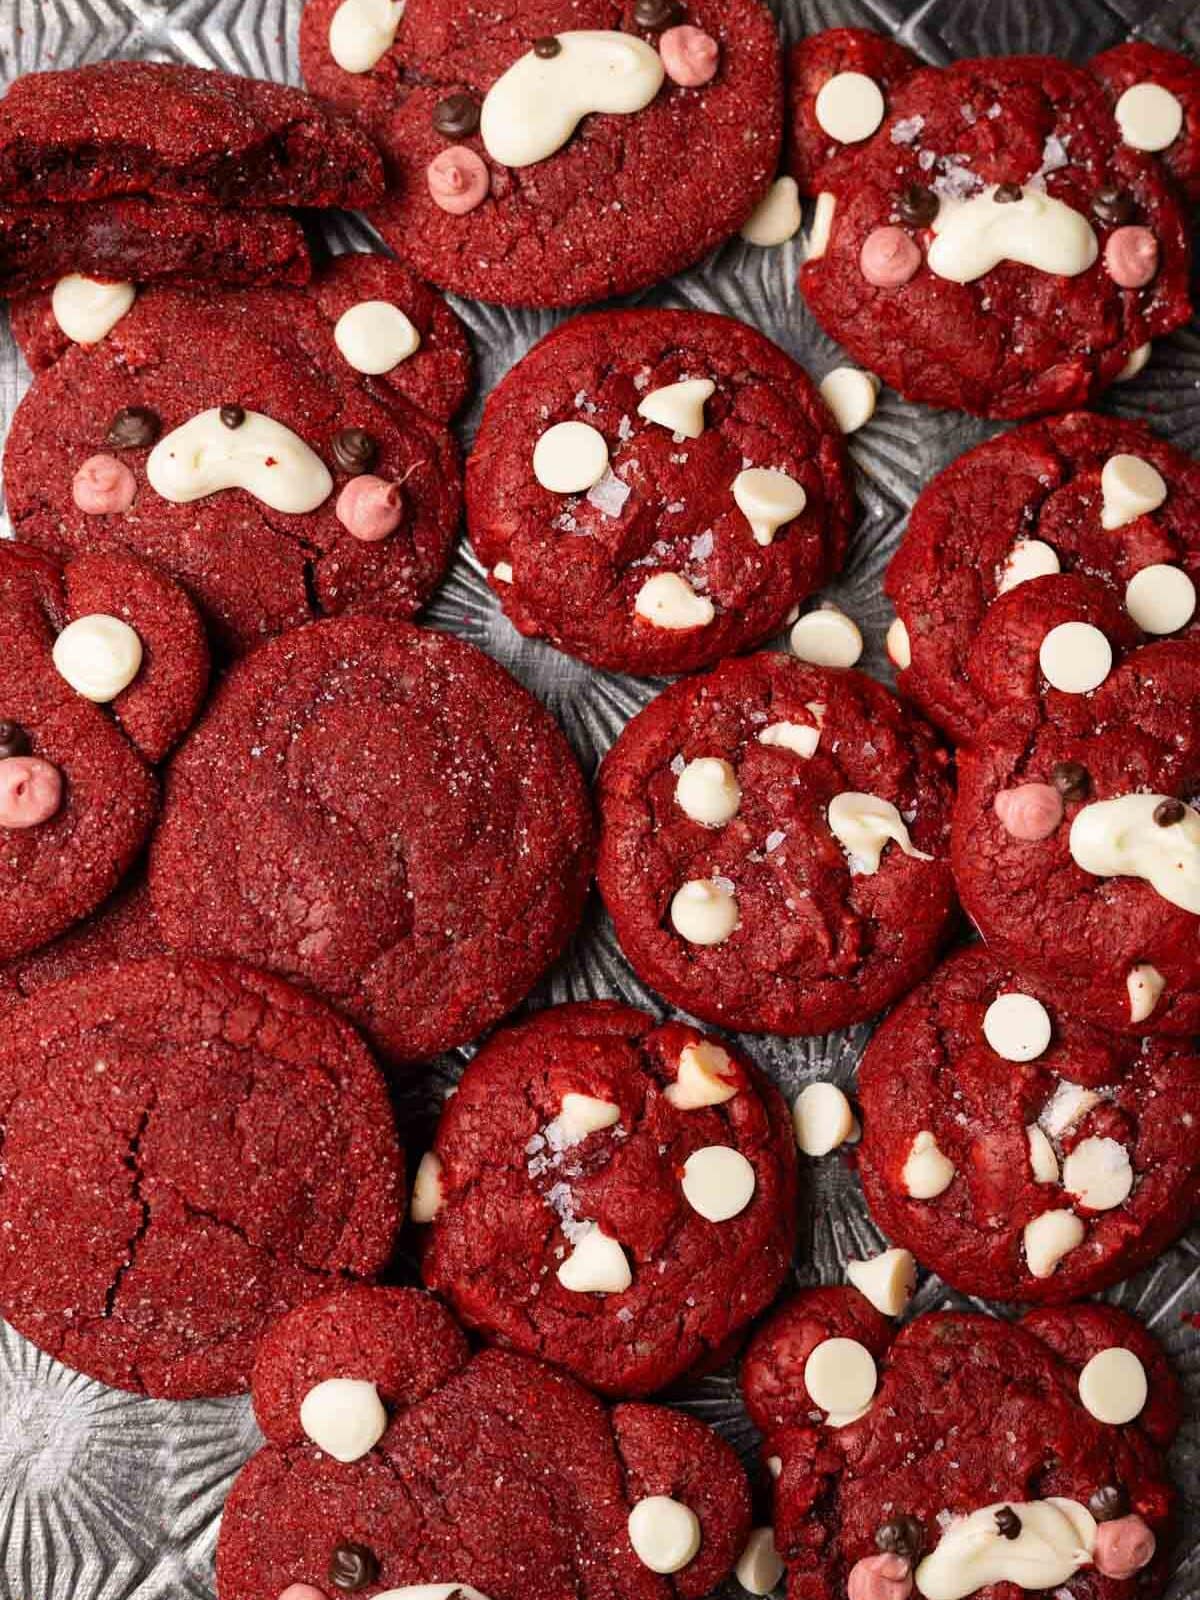 Red velvet cake mix cookies made two ways: red velvet sugar cookies and red velvet white chocolate cookies.